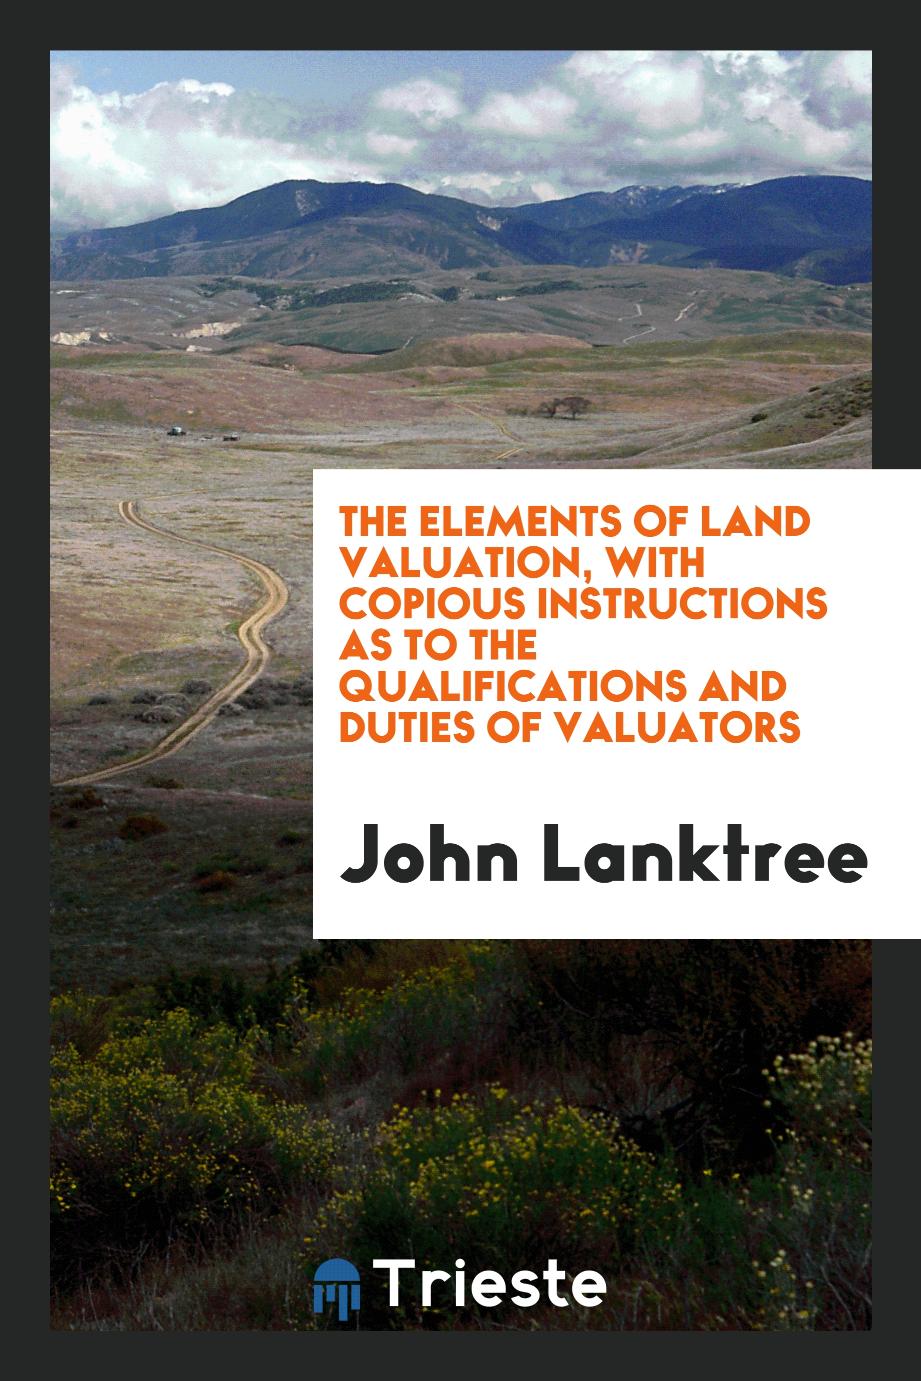 The Elements of Land Valuation, with Copious Instructions as to the Qualifications and Duties of Valuators